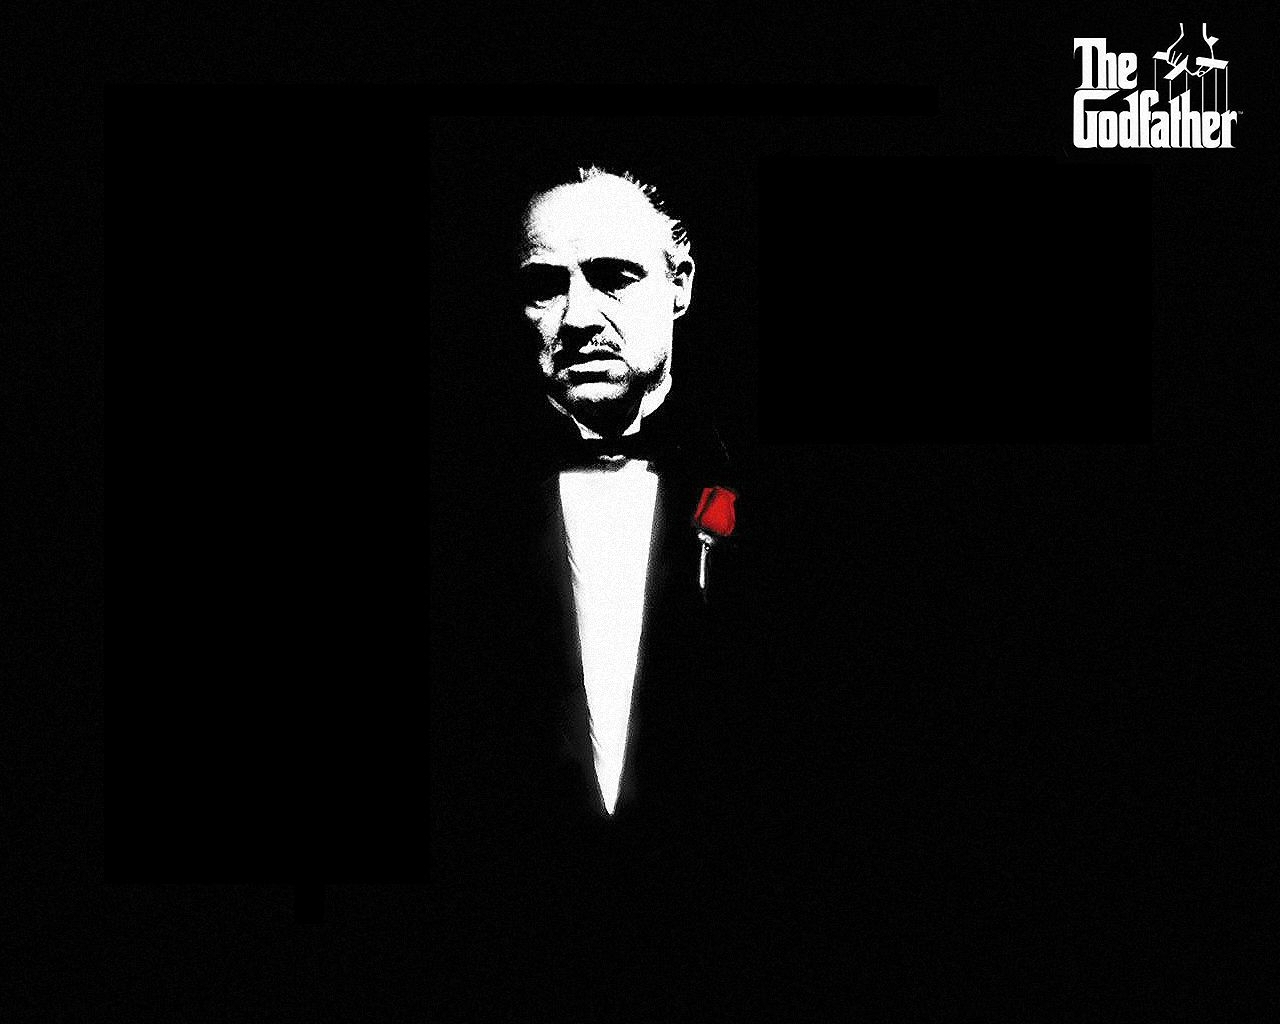 the godfather wallpaper,font,logo,album cover,graphic design,fictional character